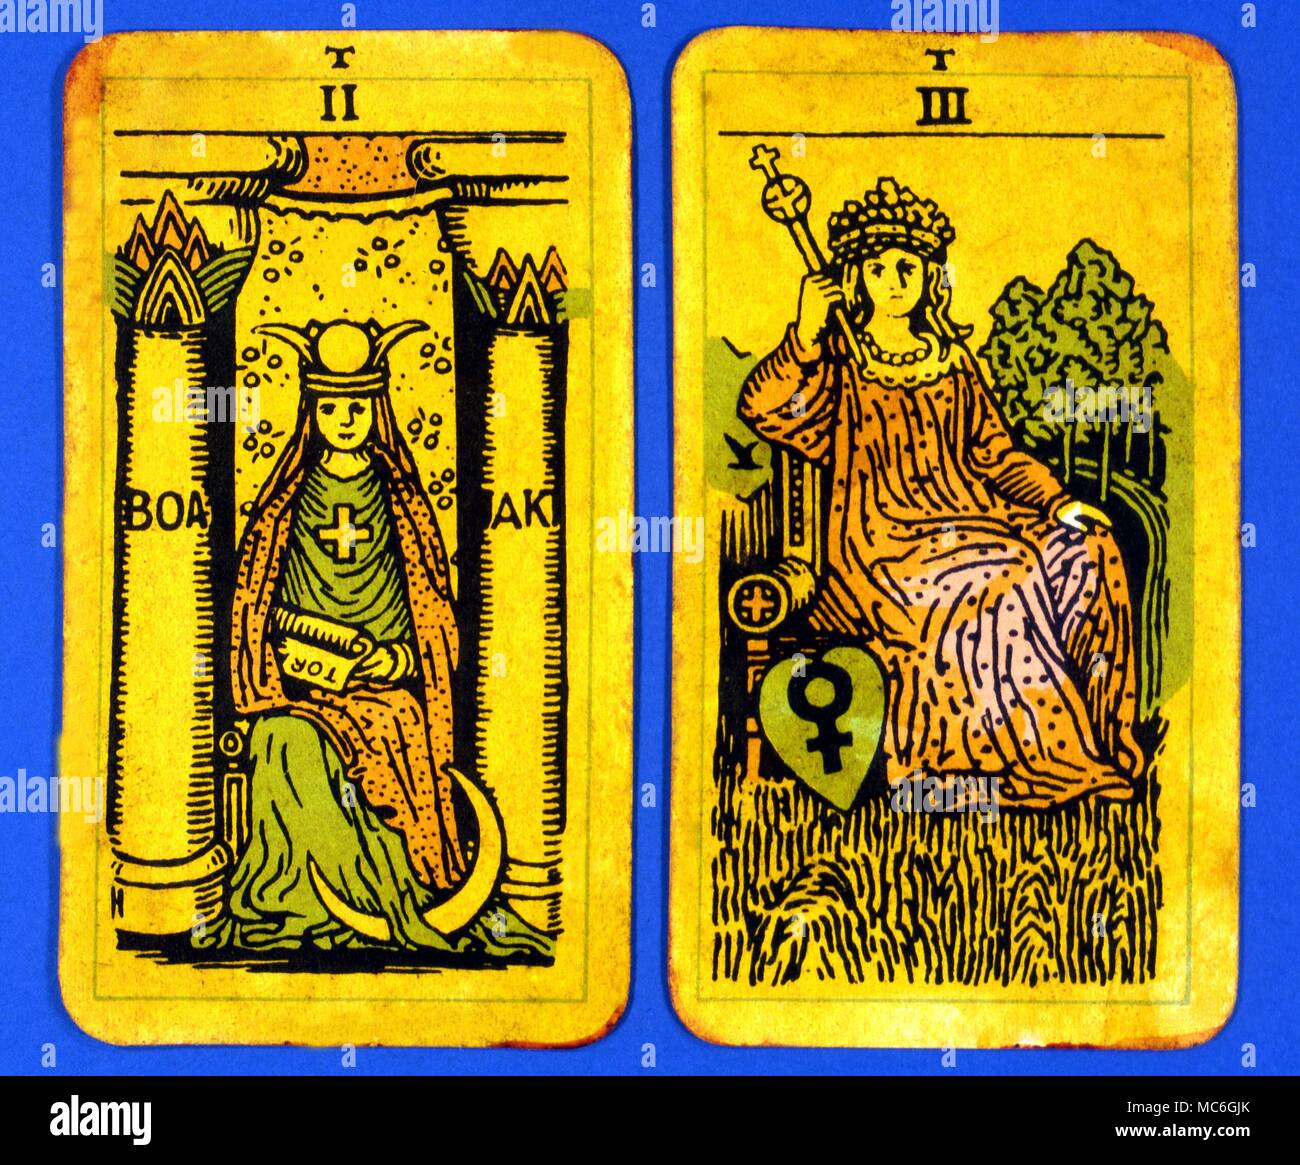 Tarot Cards-Majo Arcana- The Parisian Tarot. Card 2. The Lady Pope, and Card  3. The Empress. Two cards from a Major Arcana picture Tarot, probably  designed in an archaizing style in loose